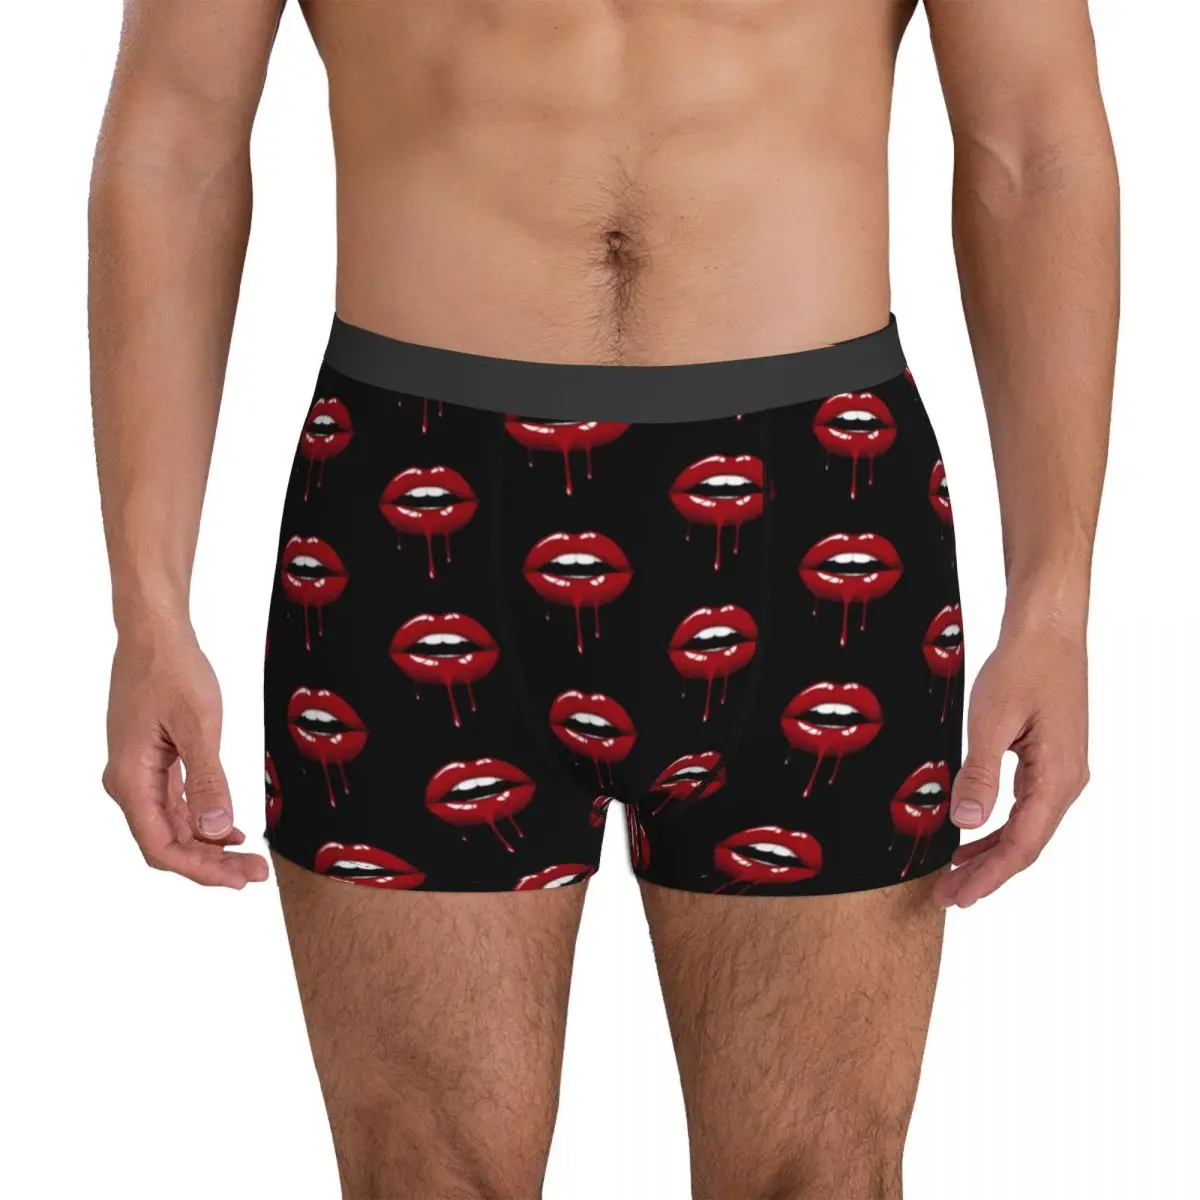 

Red Dripping Lips Underwear Glamour Print Men's Panties Sublimation Sexy Boxer Shorts High Quality Shorts Briefs Plus Size